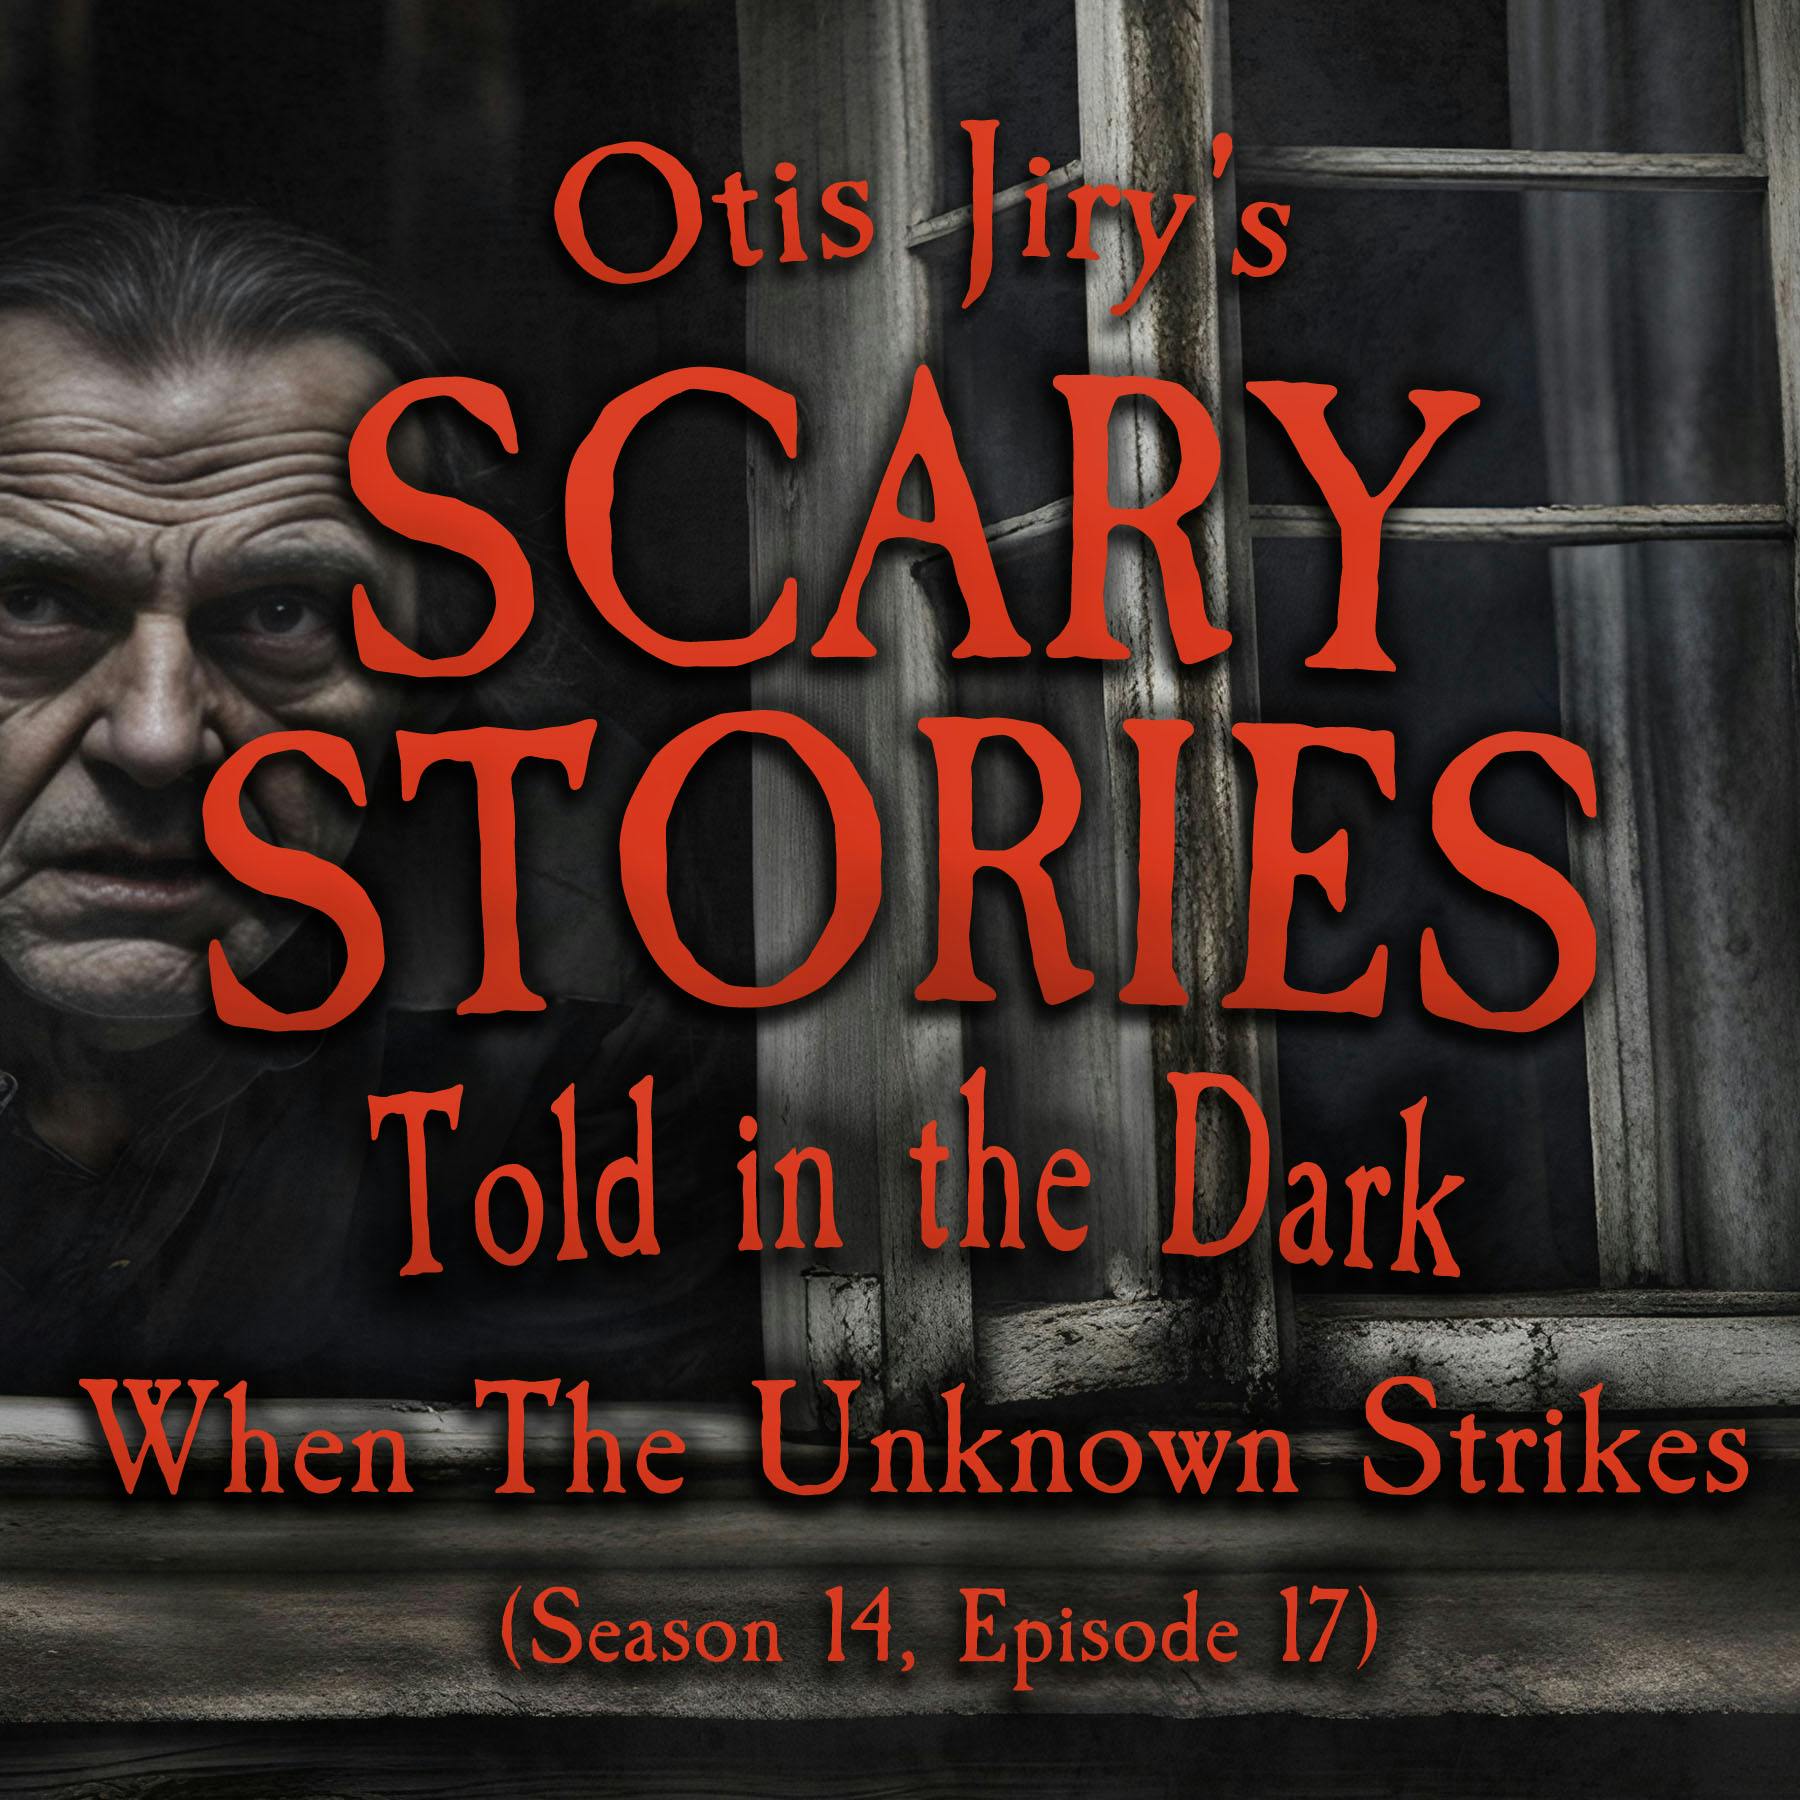 S14E17 - ”When the Unknown Strikes” – Scary Stories Told in the Dark